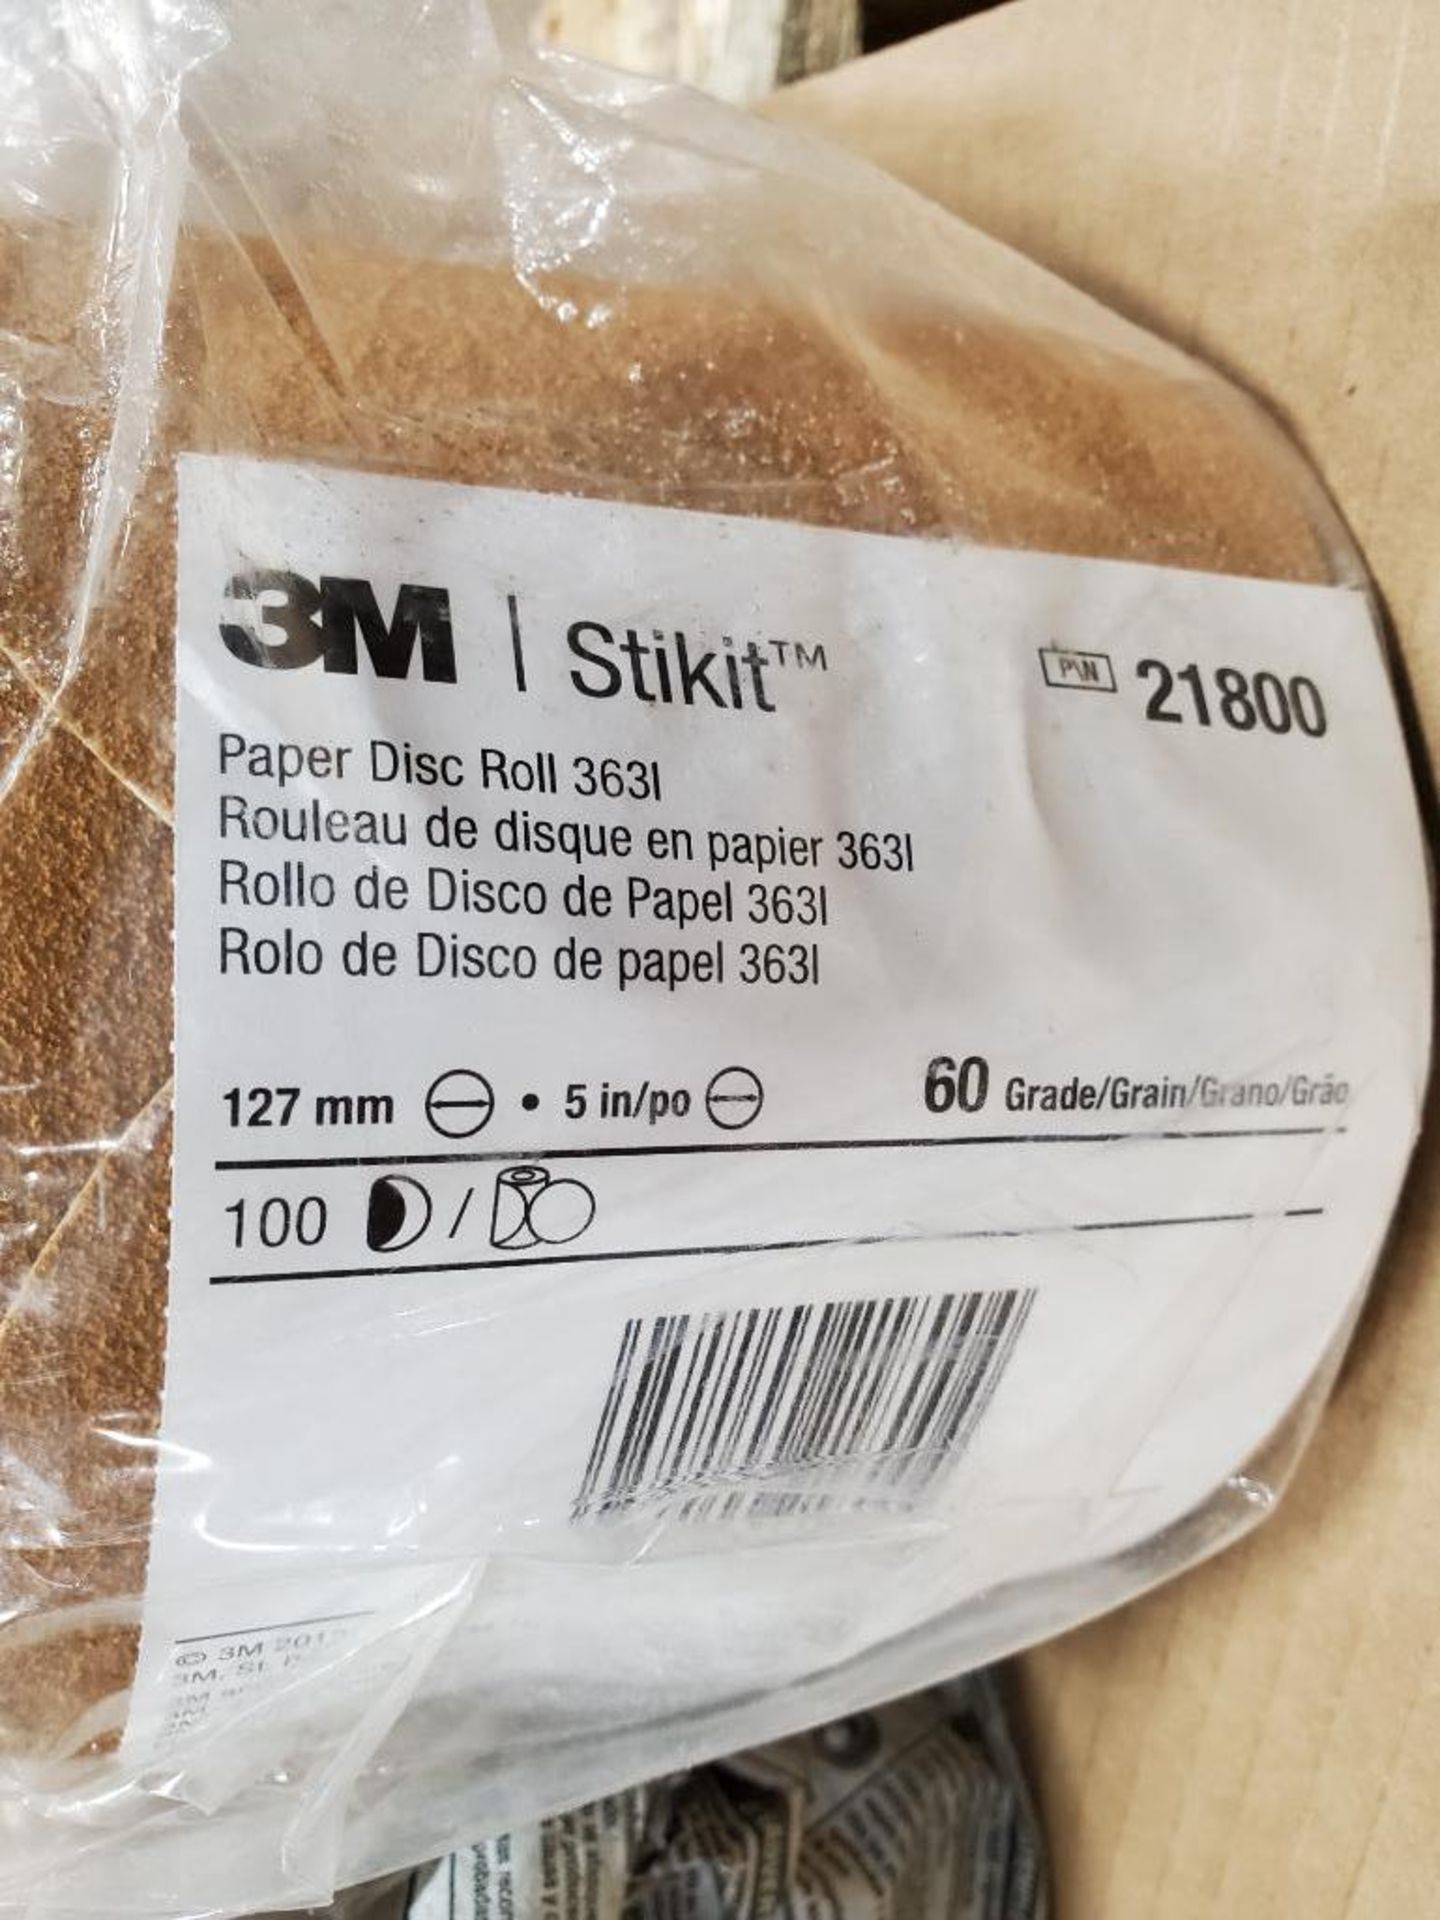 Qty 4 - 3M Stikit Paper disc roll 363I. 21800. - Image 2 of 4